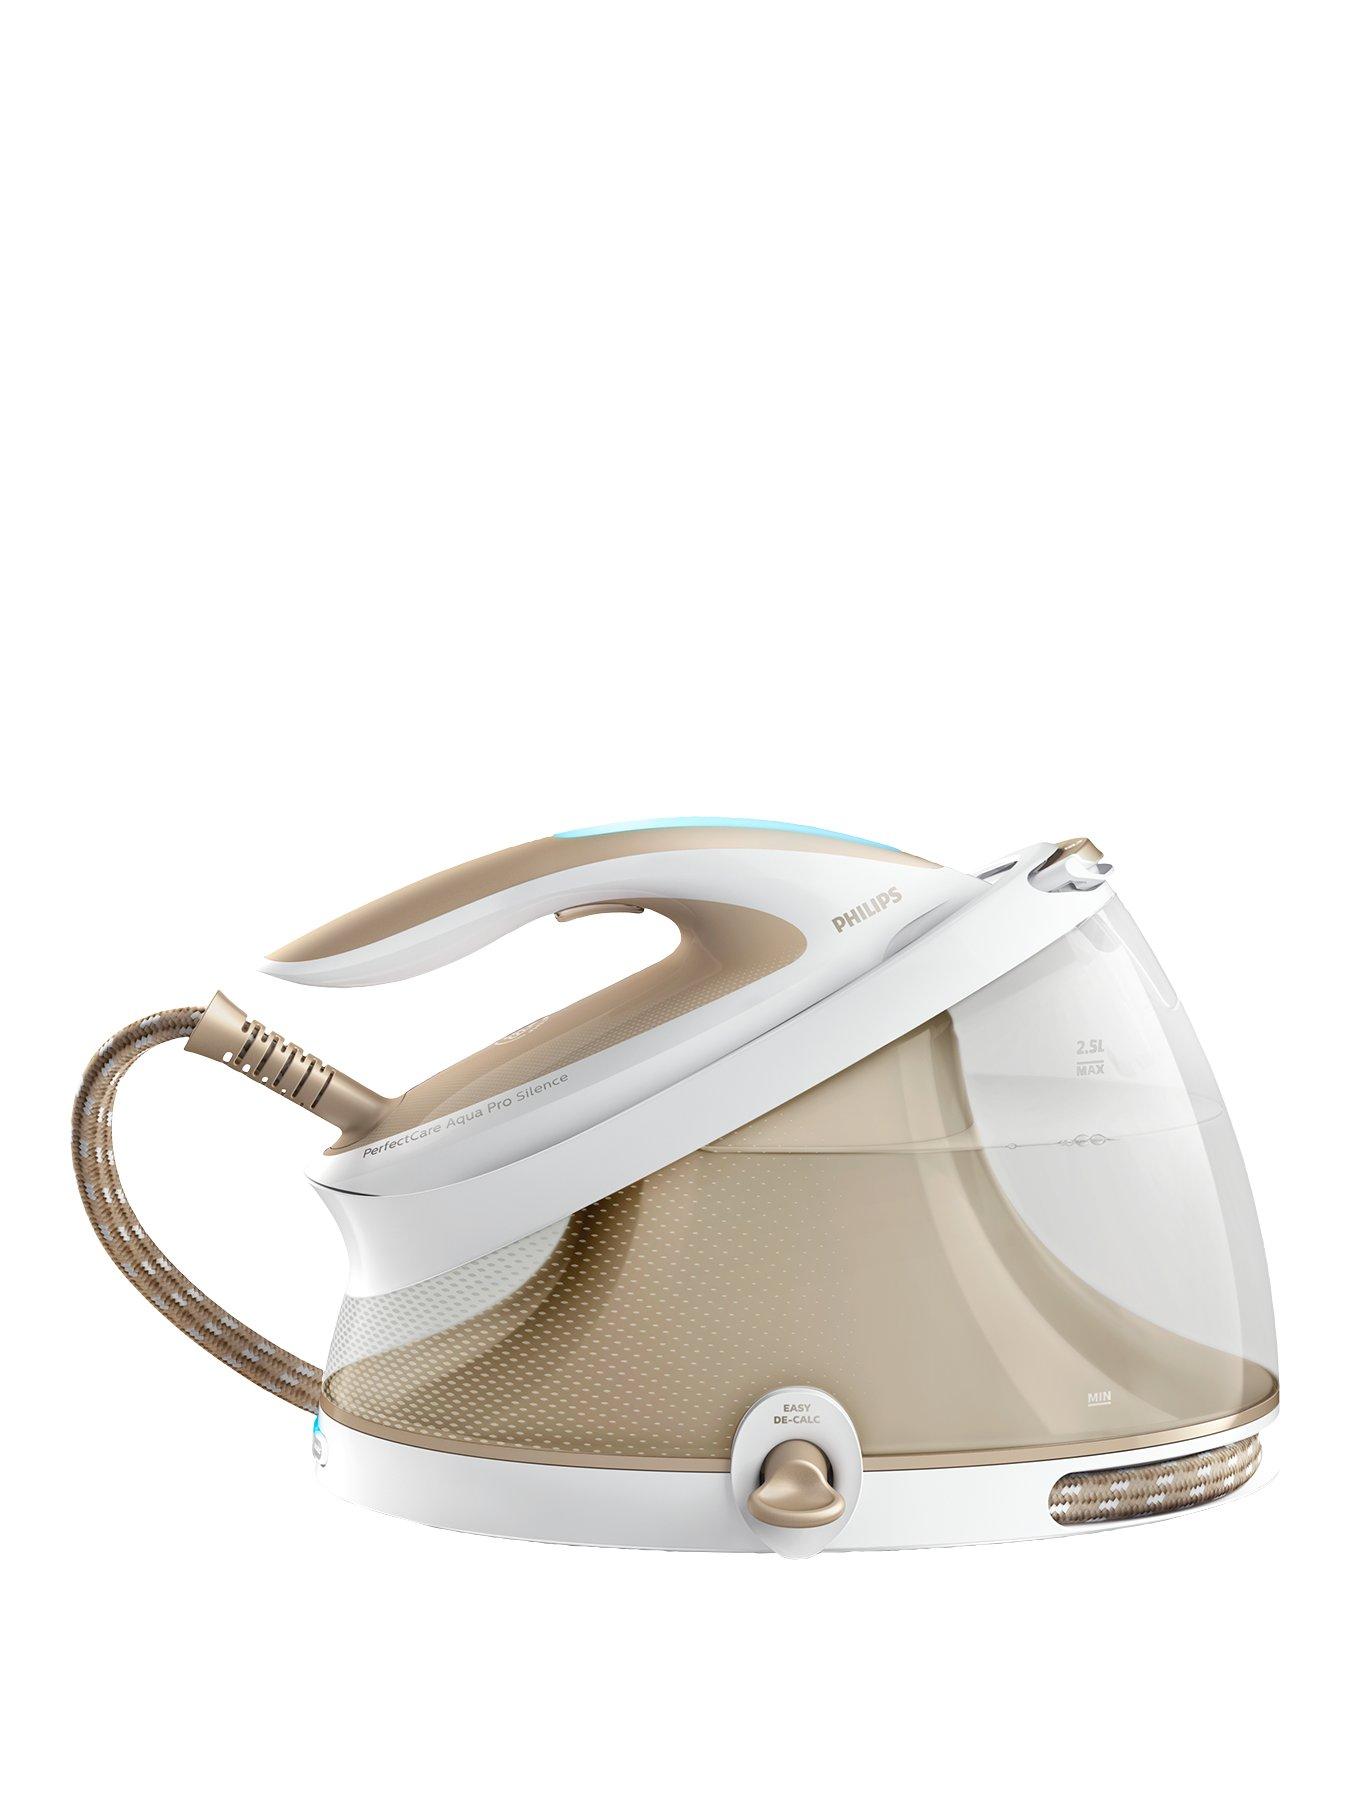 Philips Perfectcare Aqua Pro Steam Generator Iron Gc9410/60 With Up To 450G Steam Boost – Champagne Edition